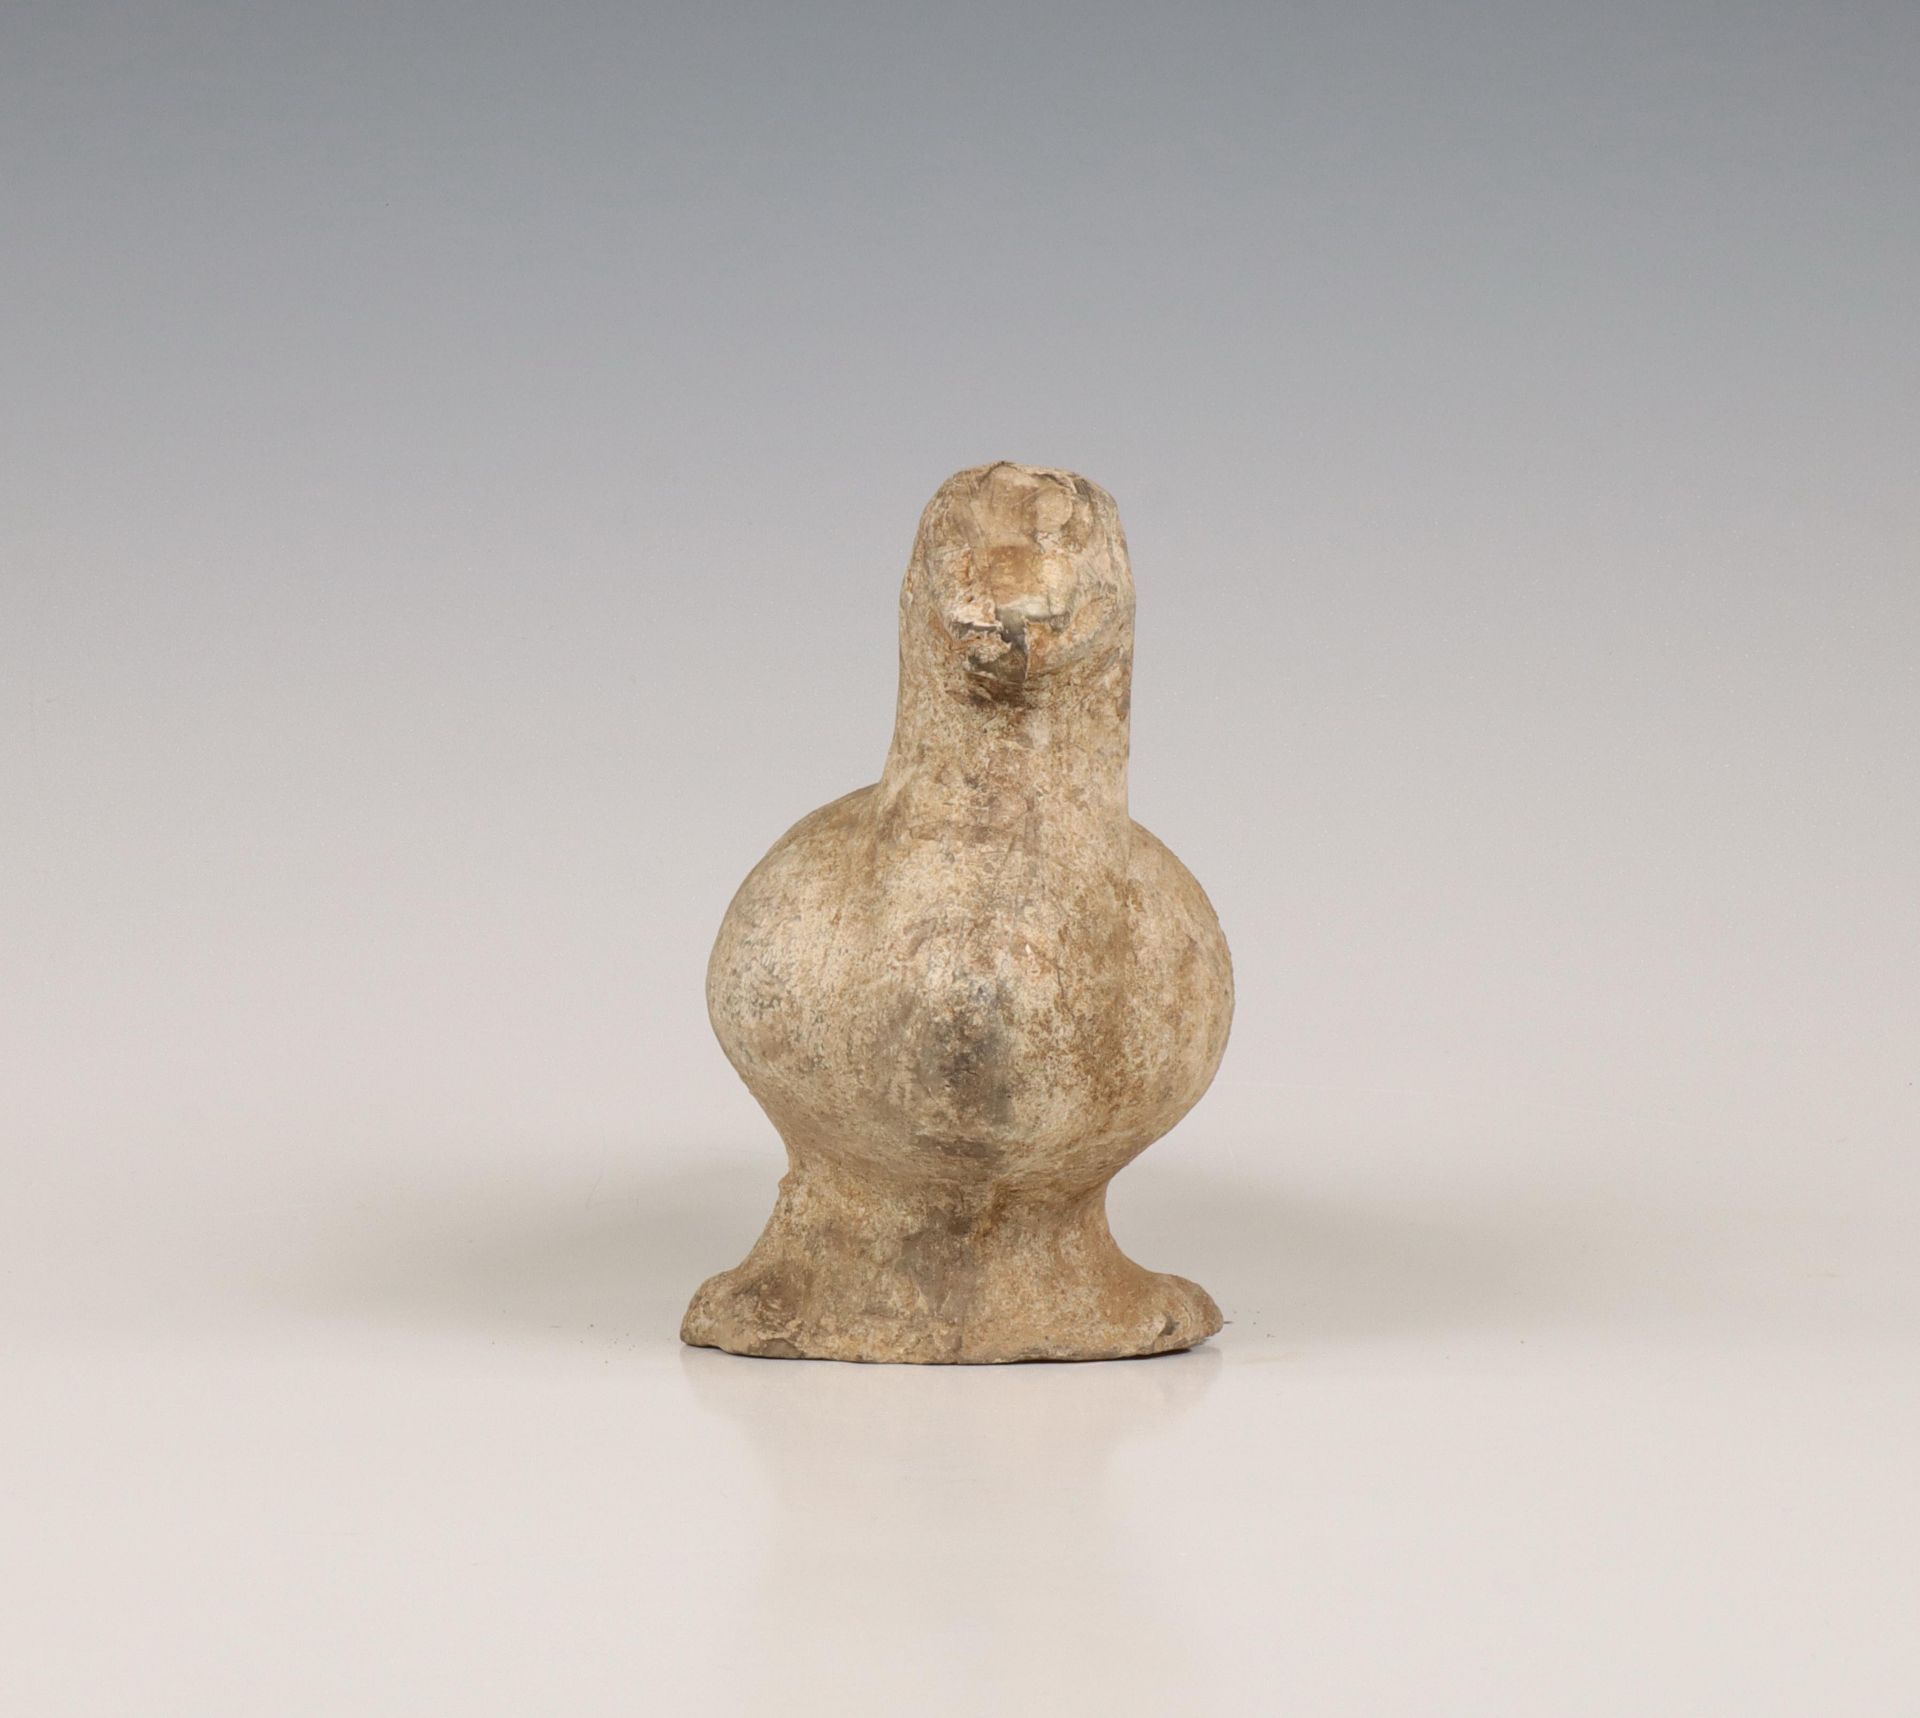 China, grey pottery model of a duck, probably Han dynasty (206 BC-220 AD), - Image 6 of 6